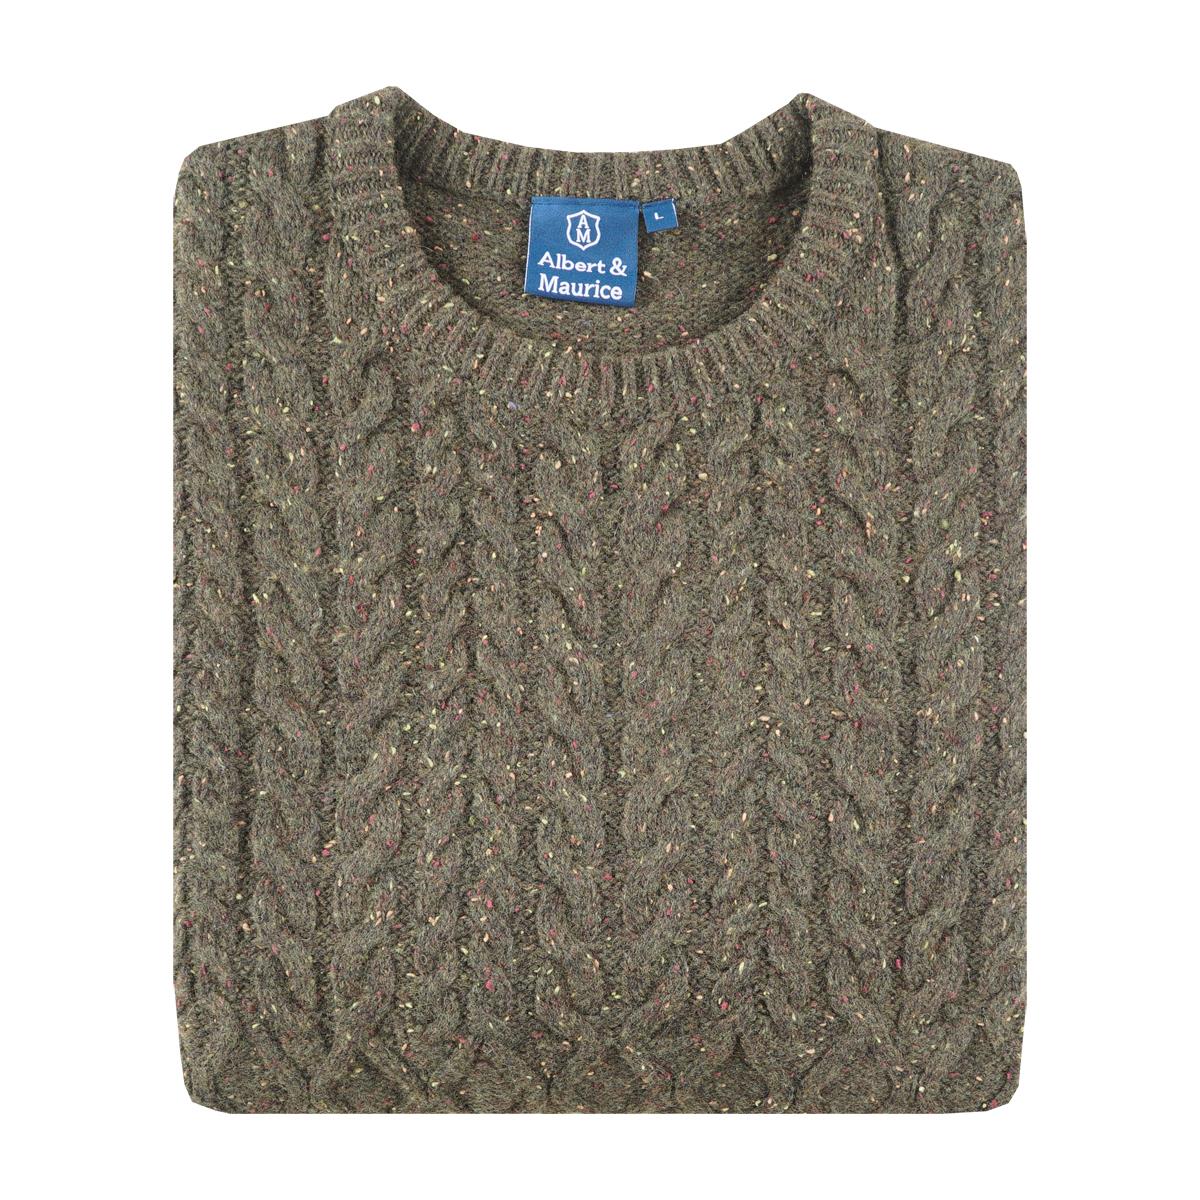 Albert and Maurice Mens Ledbury Knit Crew Neck Jumper Moss Questions & Answers